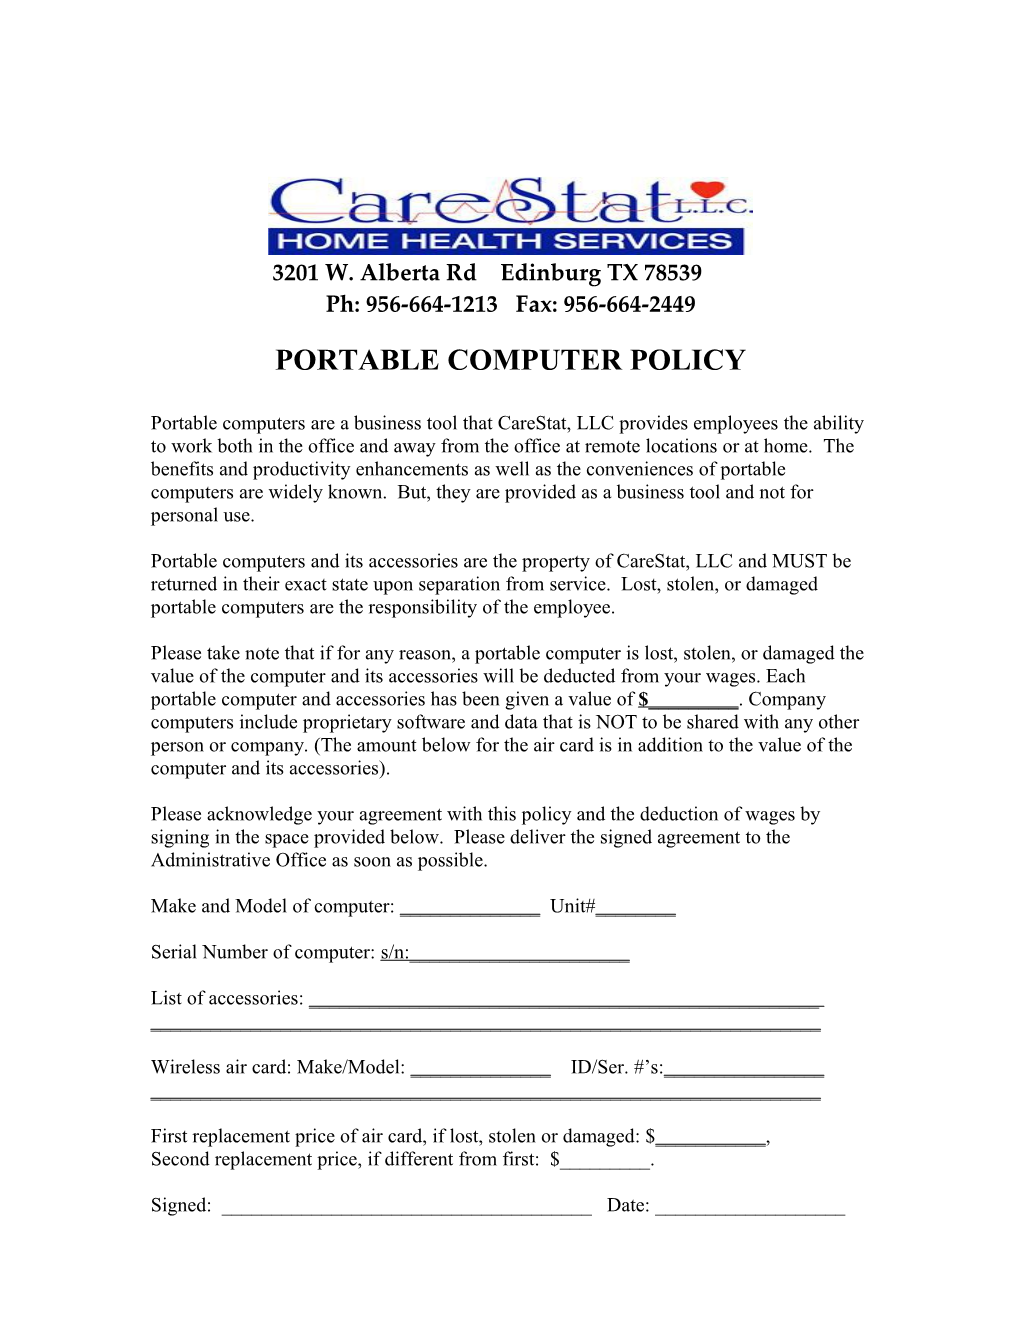 Personal Computer Policy